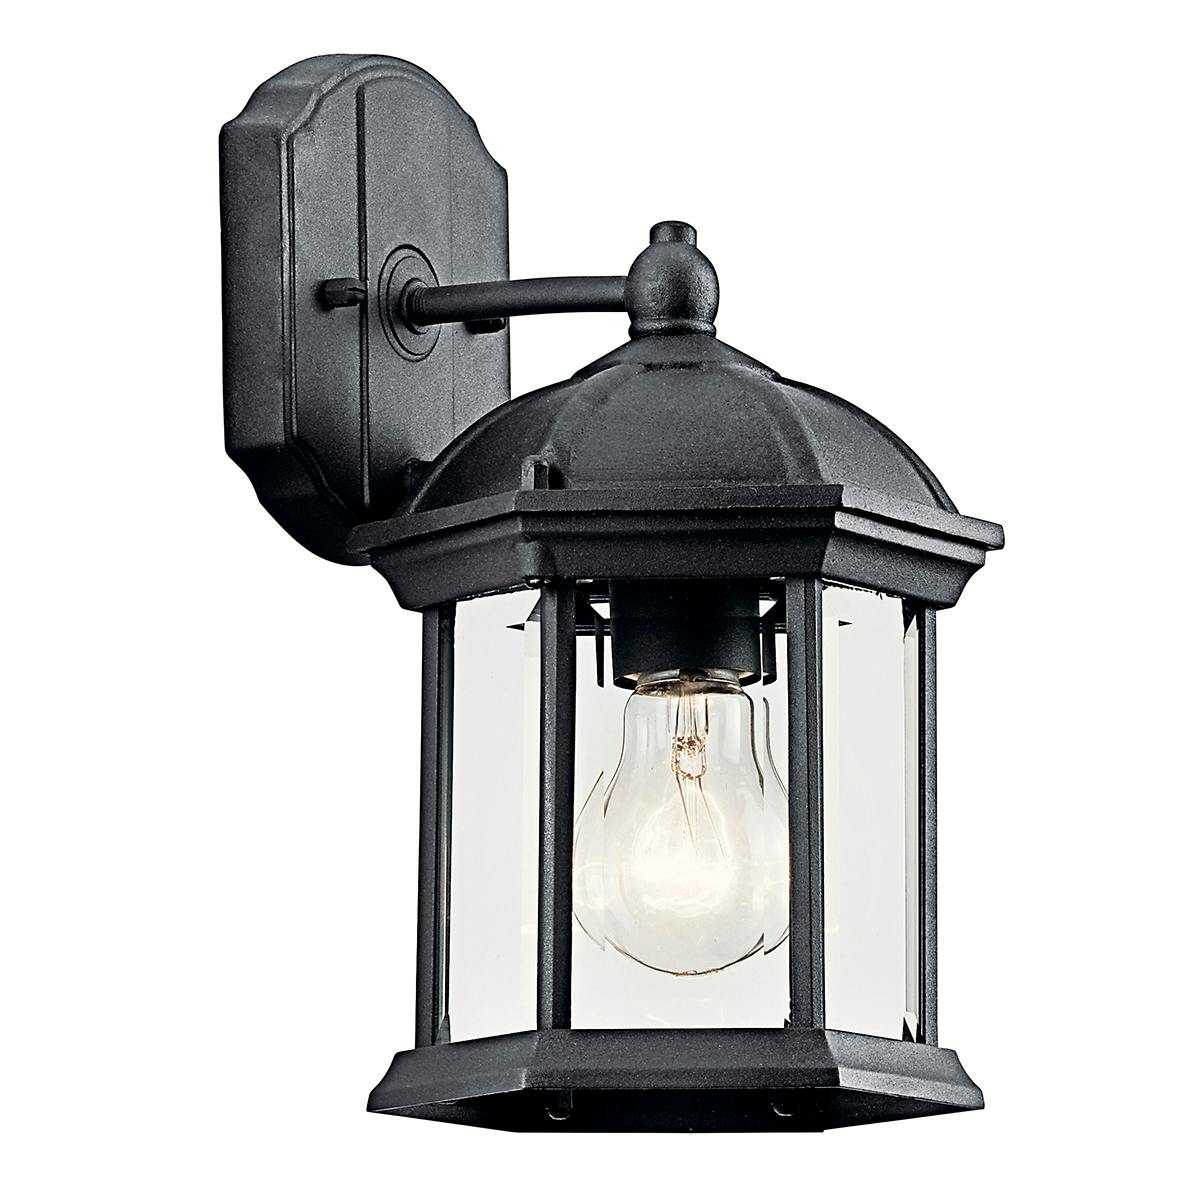 Barrie 10.3" Wall Light w/ LED Bulb Black on a white background